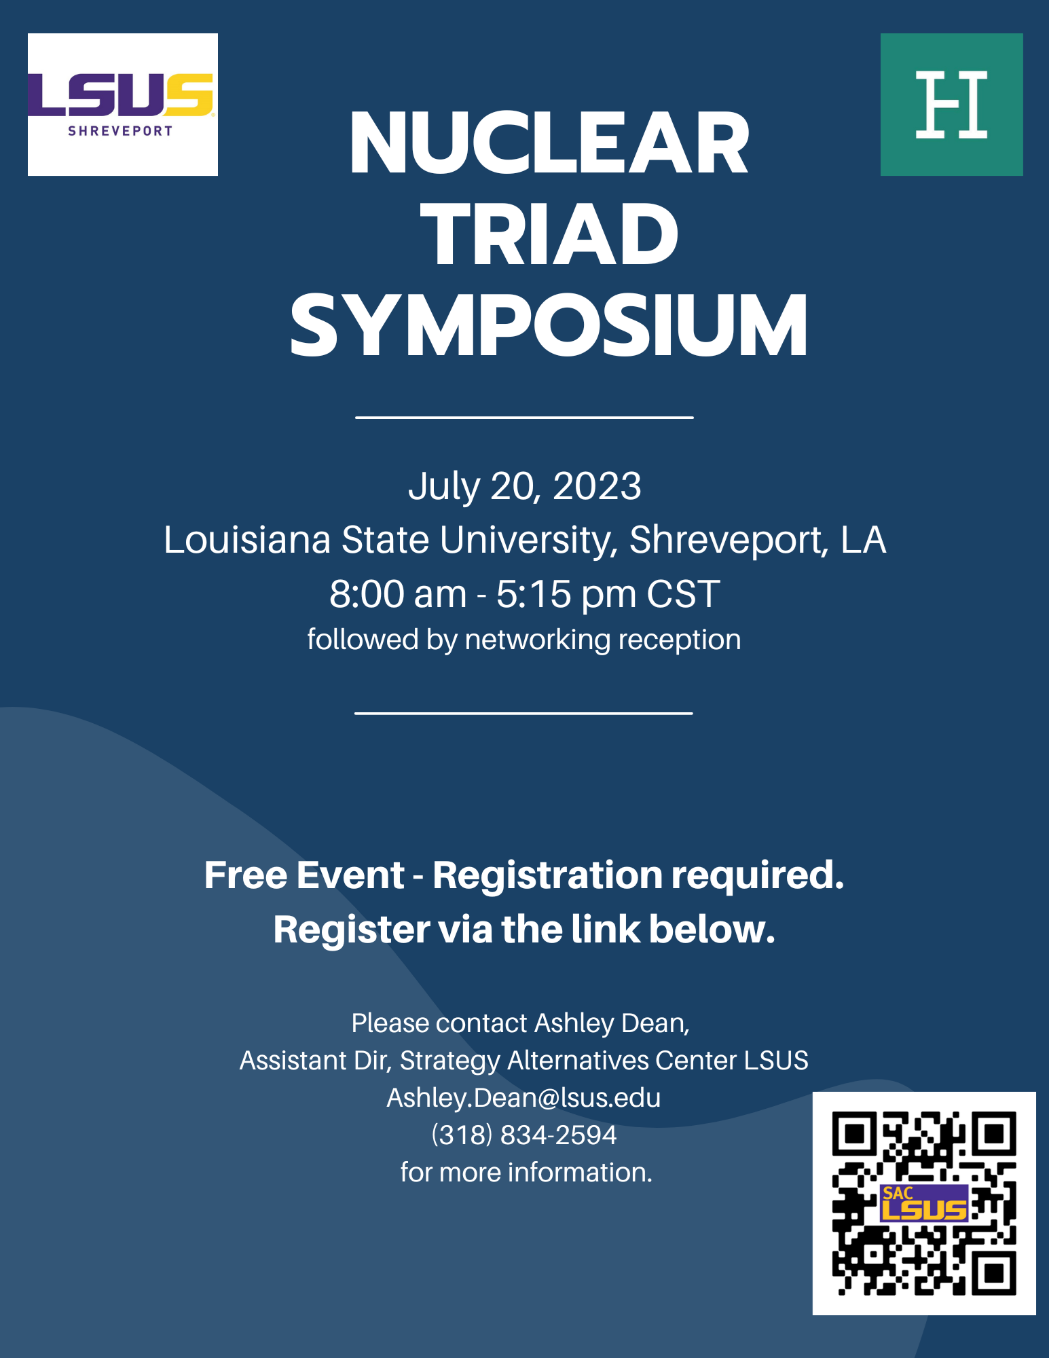 nuclear triad flyer 2023 - lsus - july 20 - 8 - 5:15. register at the link belowl